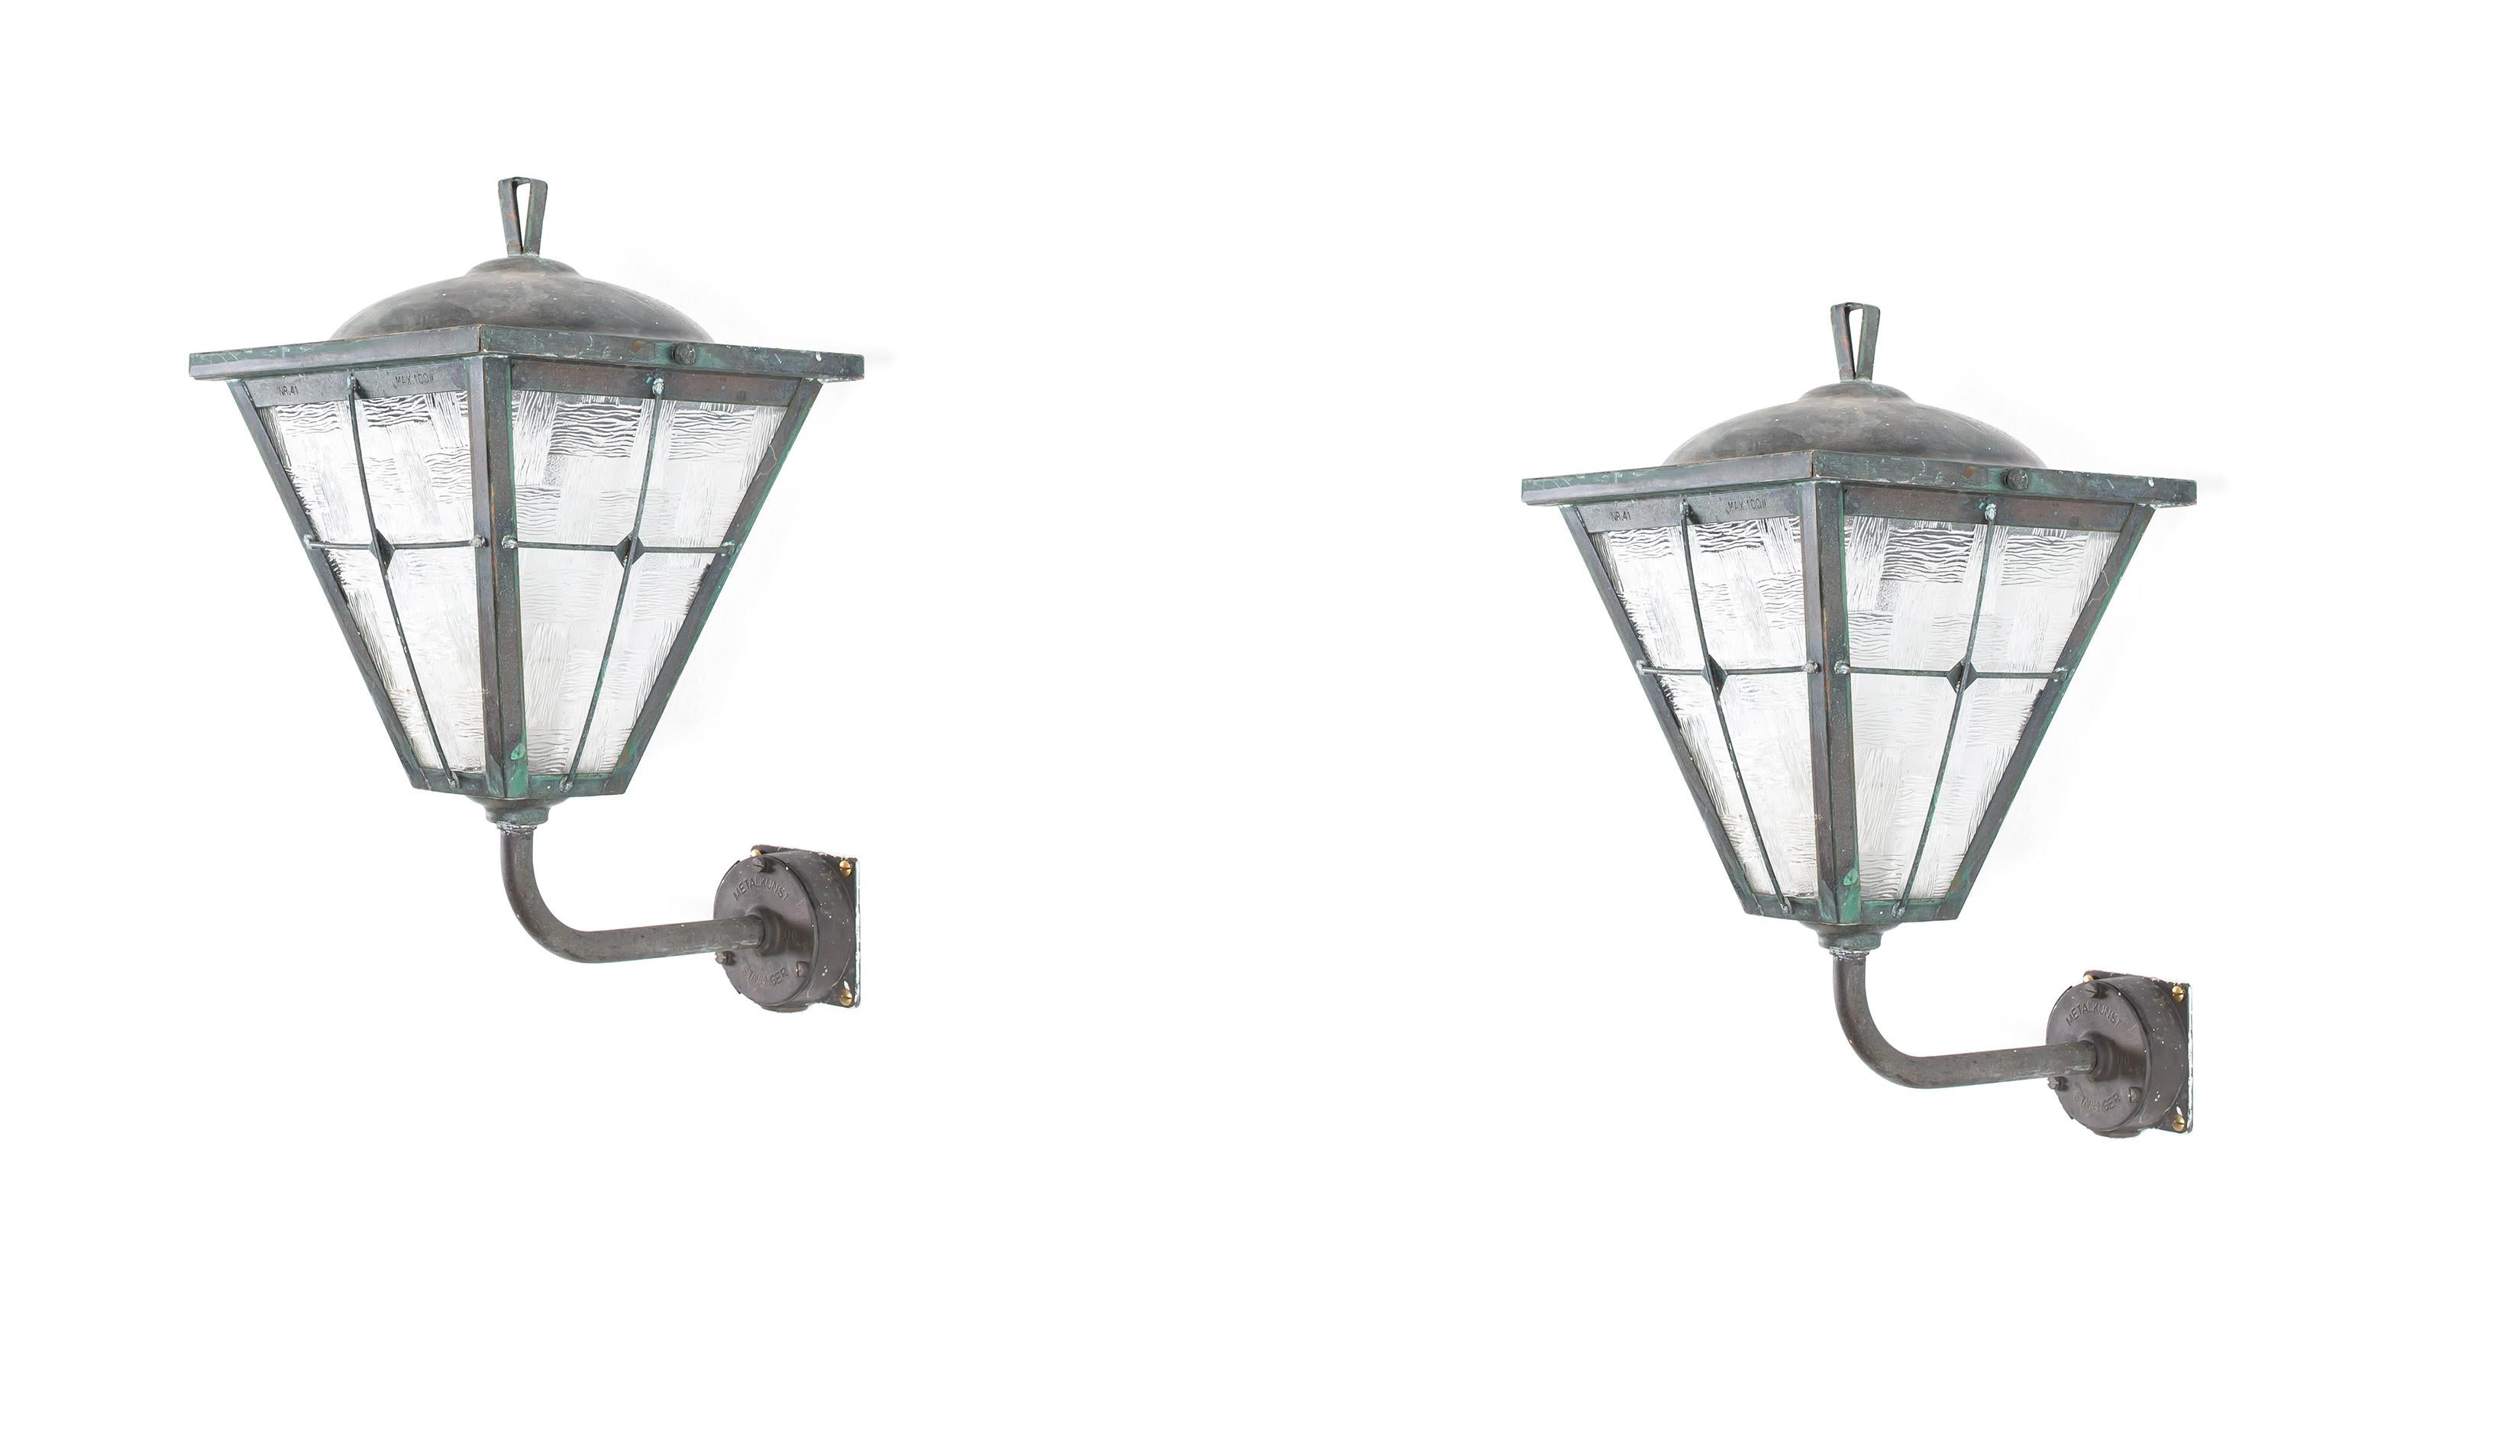 Pair of modernist outdoor wall lamps in patinated copper and glass. Designed and made in Norway from circa 1960s first half. Both lamps are fully working and in good vintage condition. The lamps are fitted with one E27 bulb holder (works in the US),